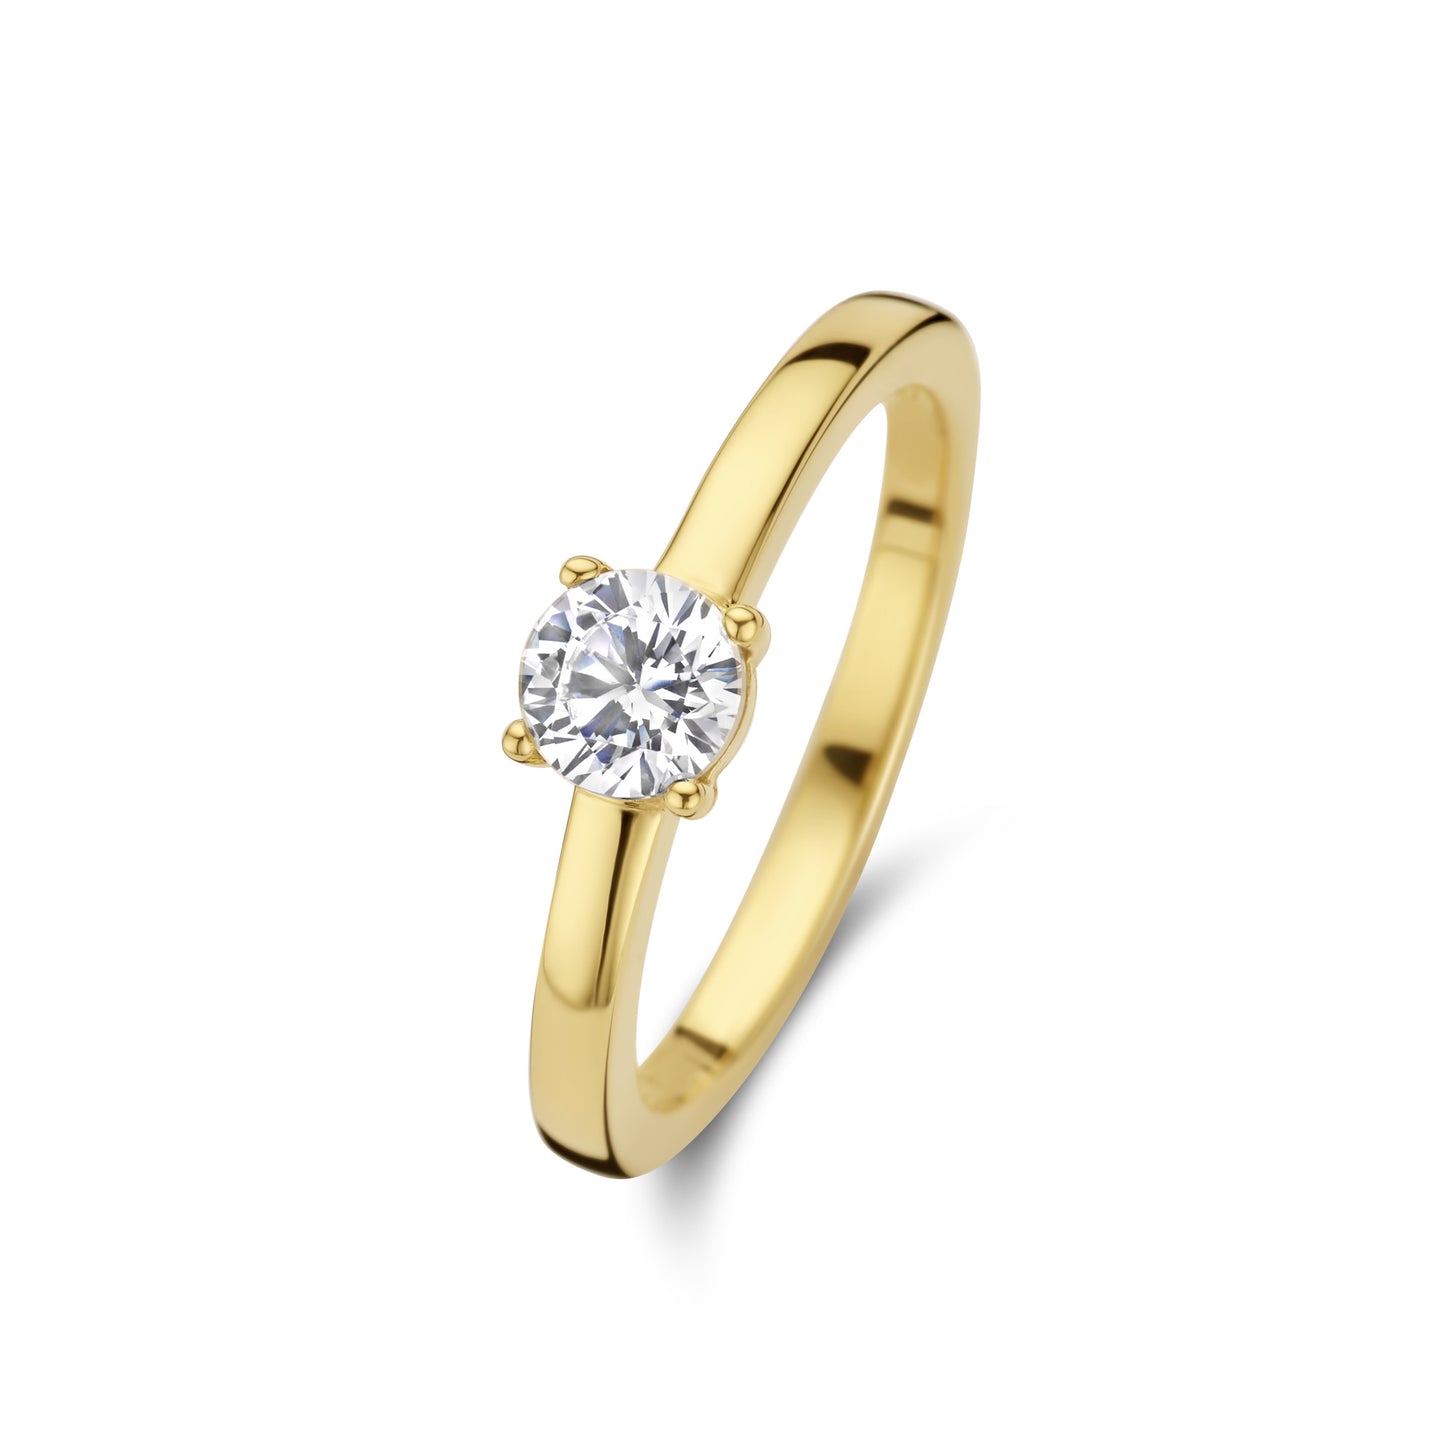 Ponte Vecchio Sofia 925 sterling silver gold plated ring with zirconia stone